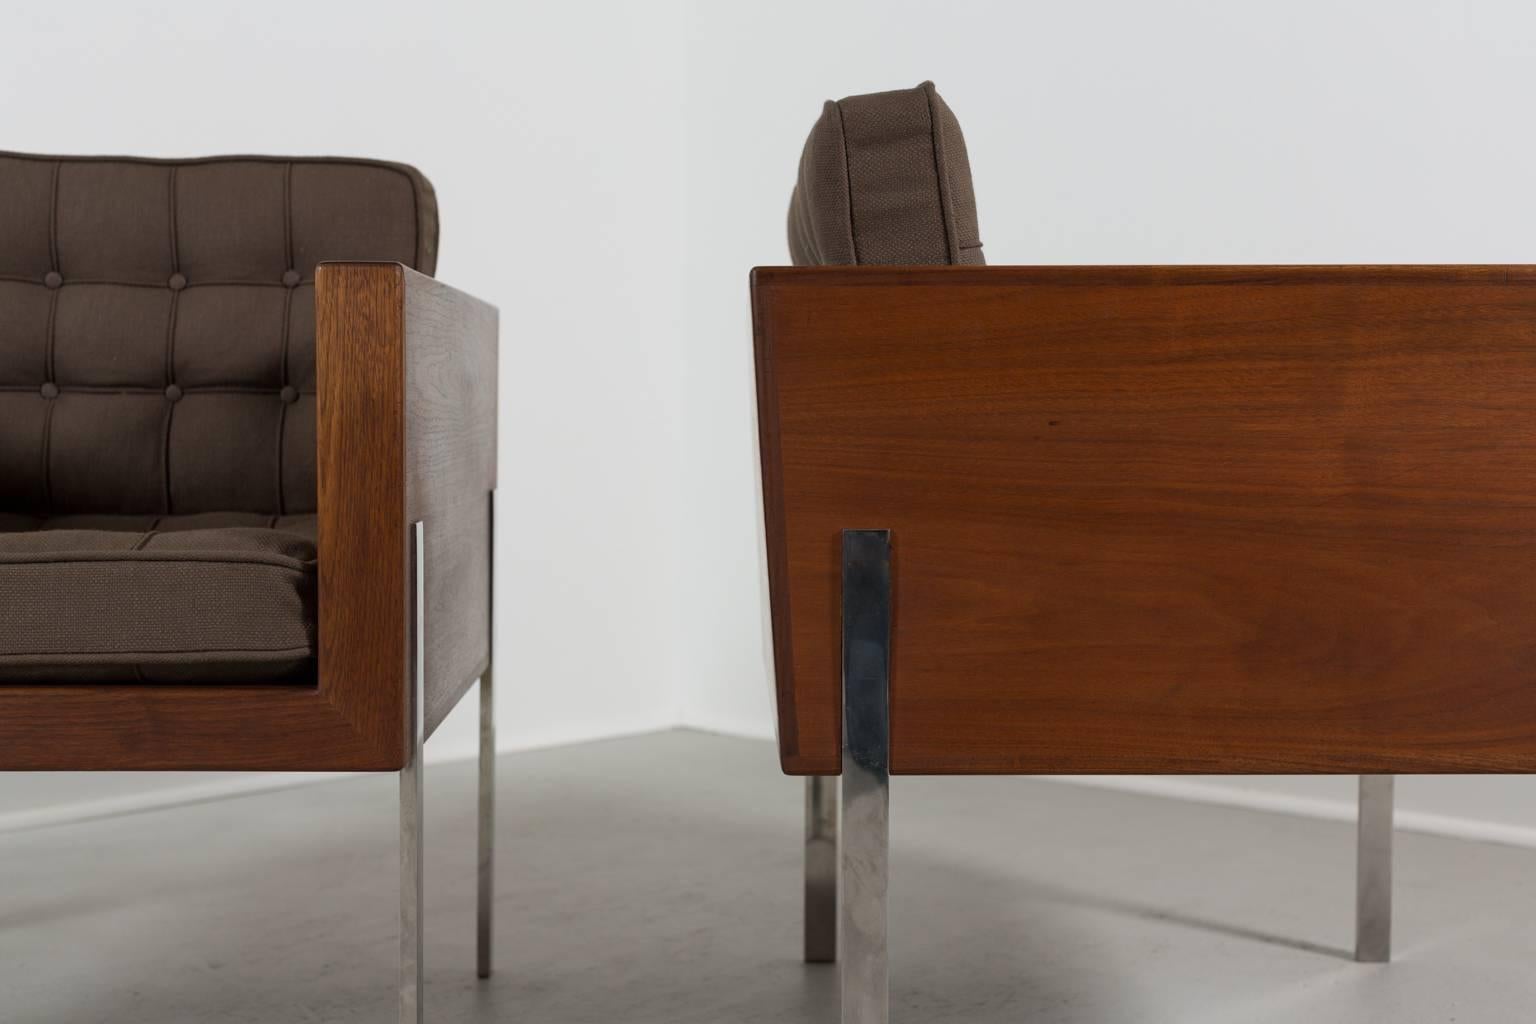 Polished Pair of Harvey Probber Cube Chairs, 1960s